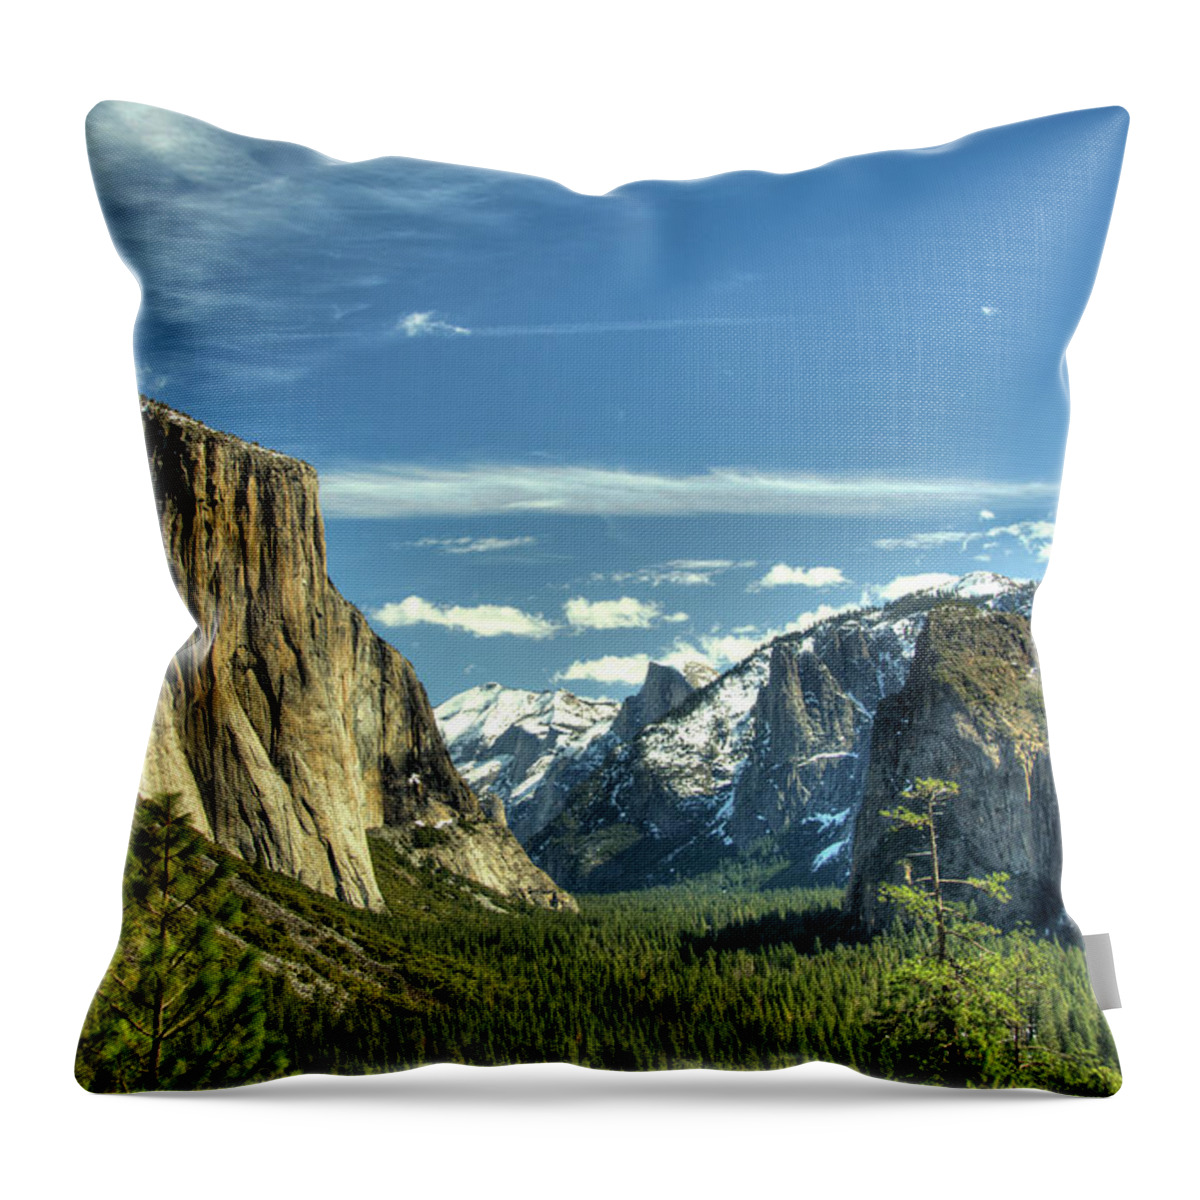 Yosemite Throw Pillow featuring the photograph Yosemite Valley by Marc Bittan